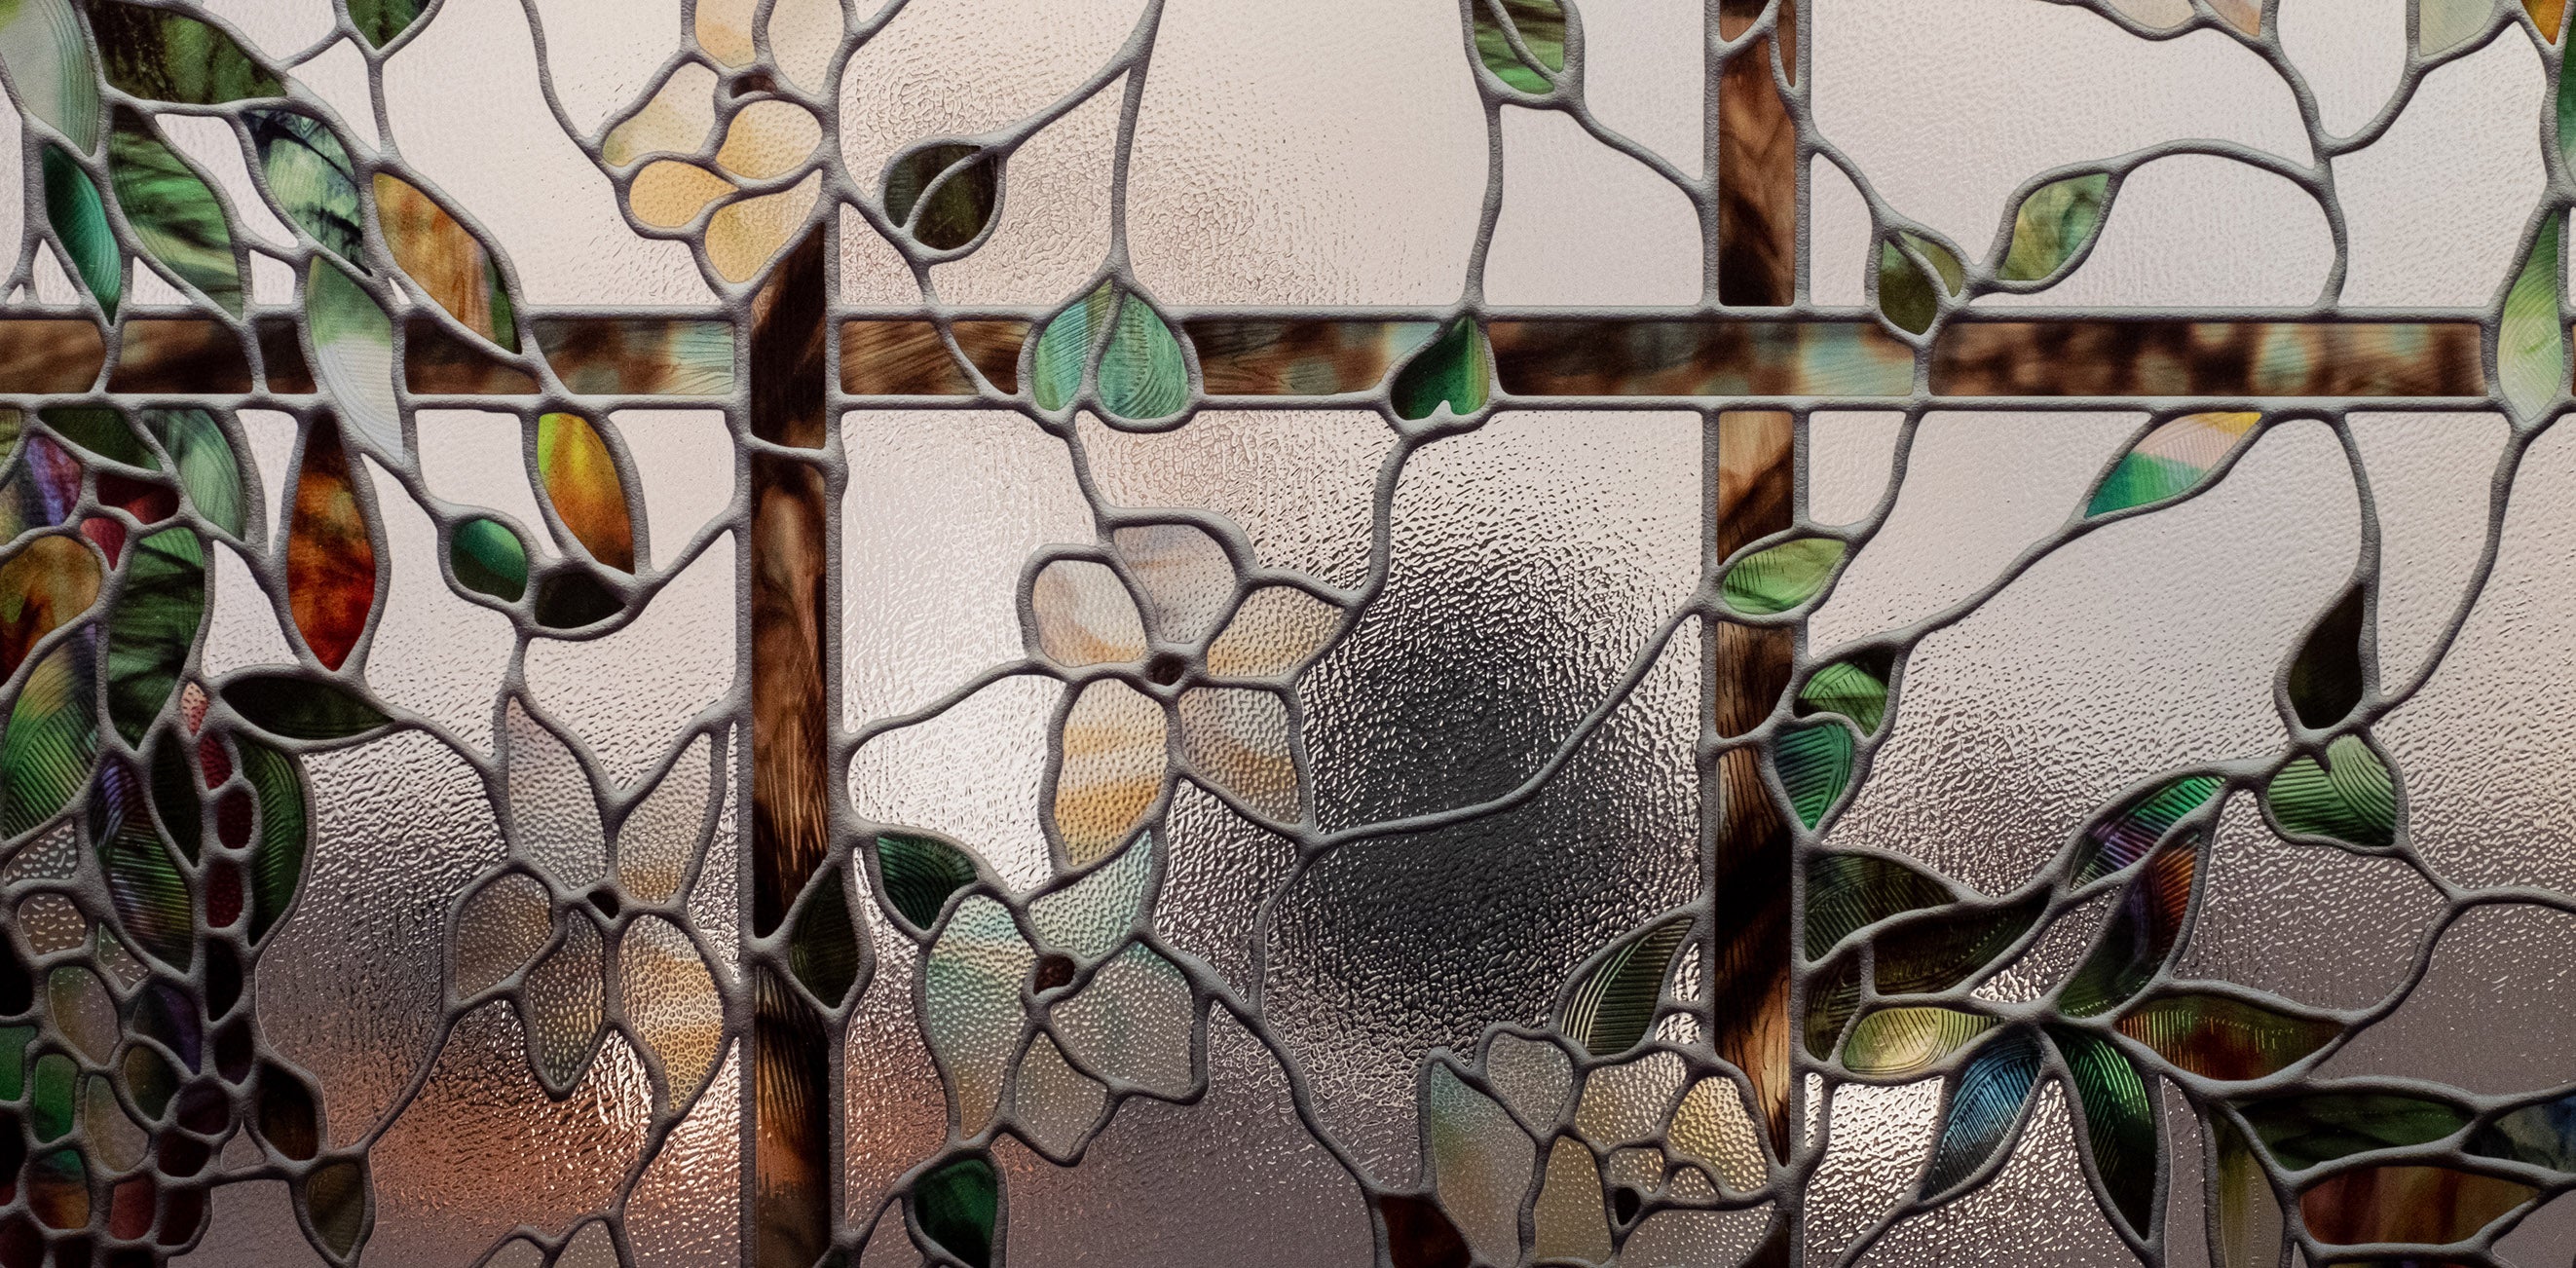 An image of a still life setting, obscured by the Lattice window film in order to exhibit the privacy level of the selected film.